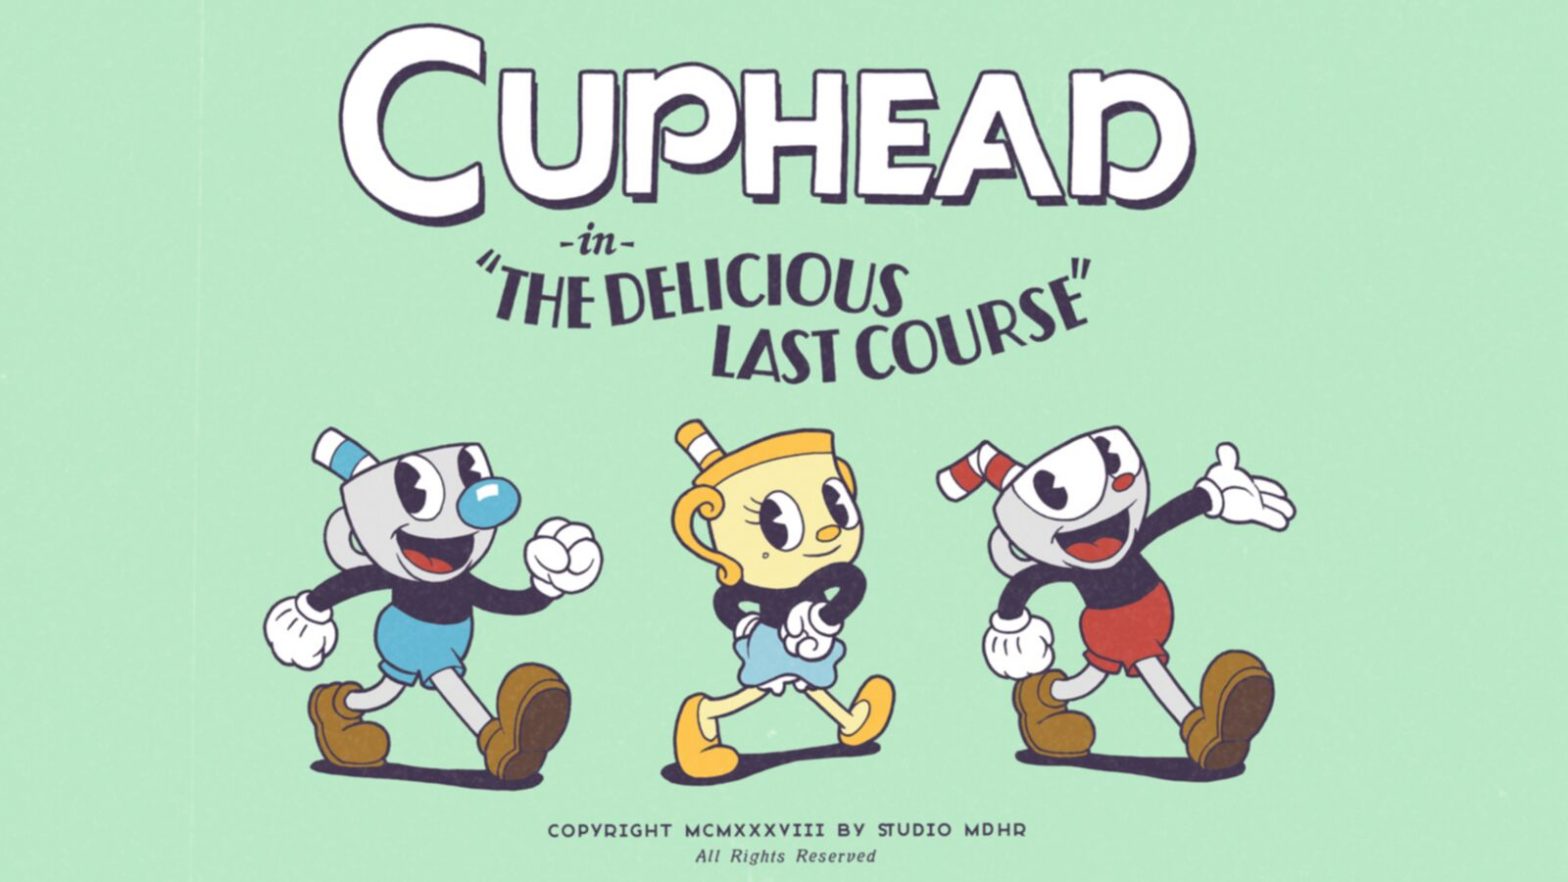 Continuation of the Cuphead cartoon universe: The Delicious Last Course